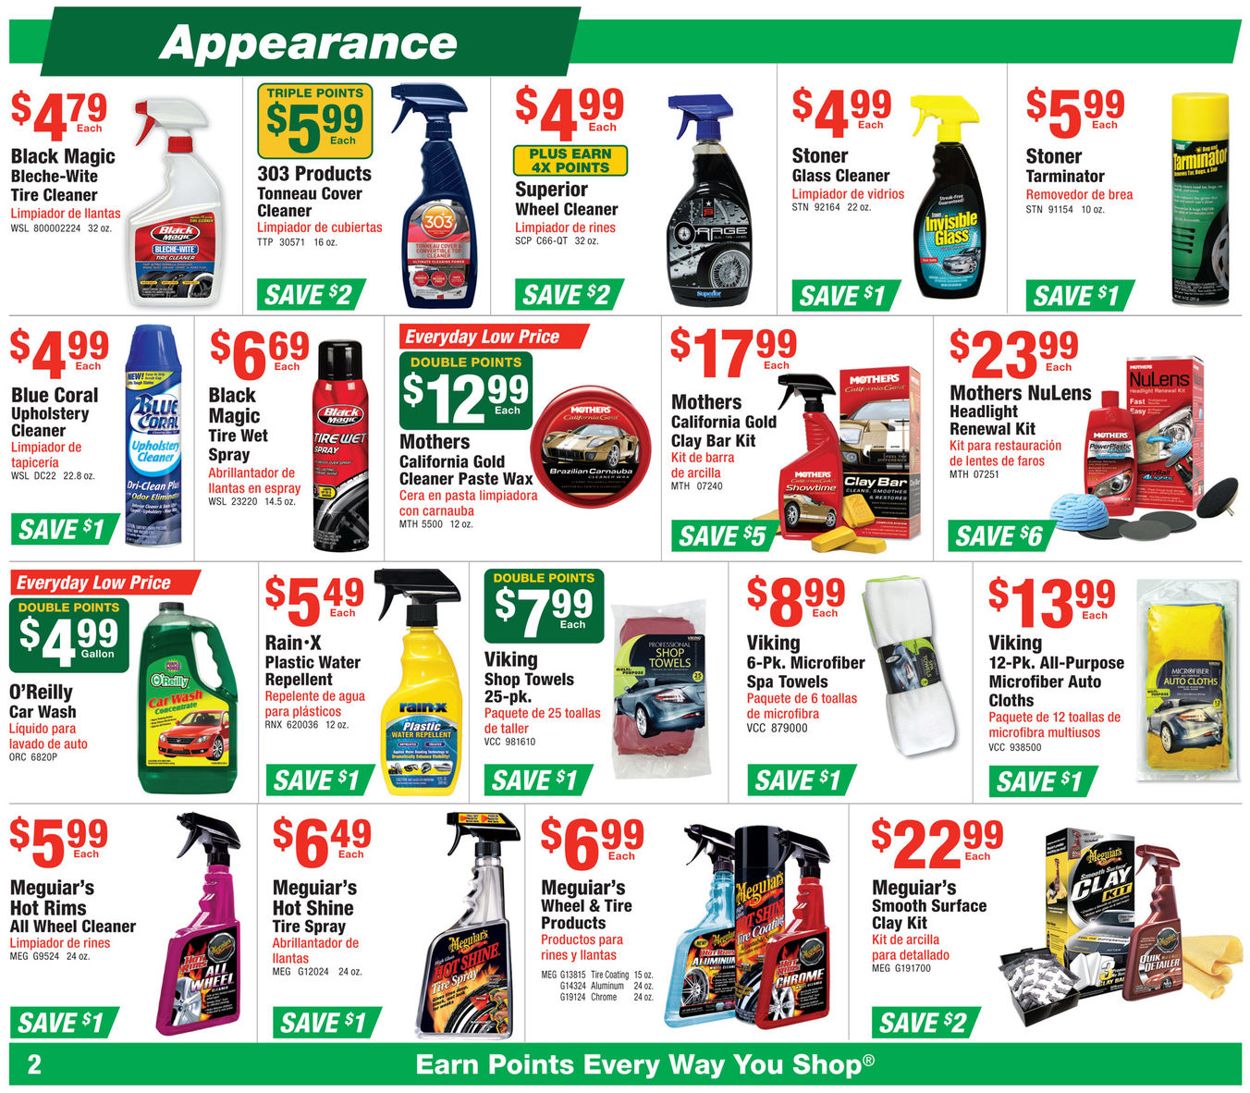 o-reilly-auto-parts-current-weekly-ad-09-30-10-27-2020-2-frequent